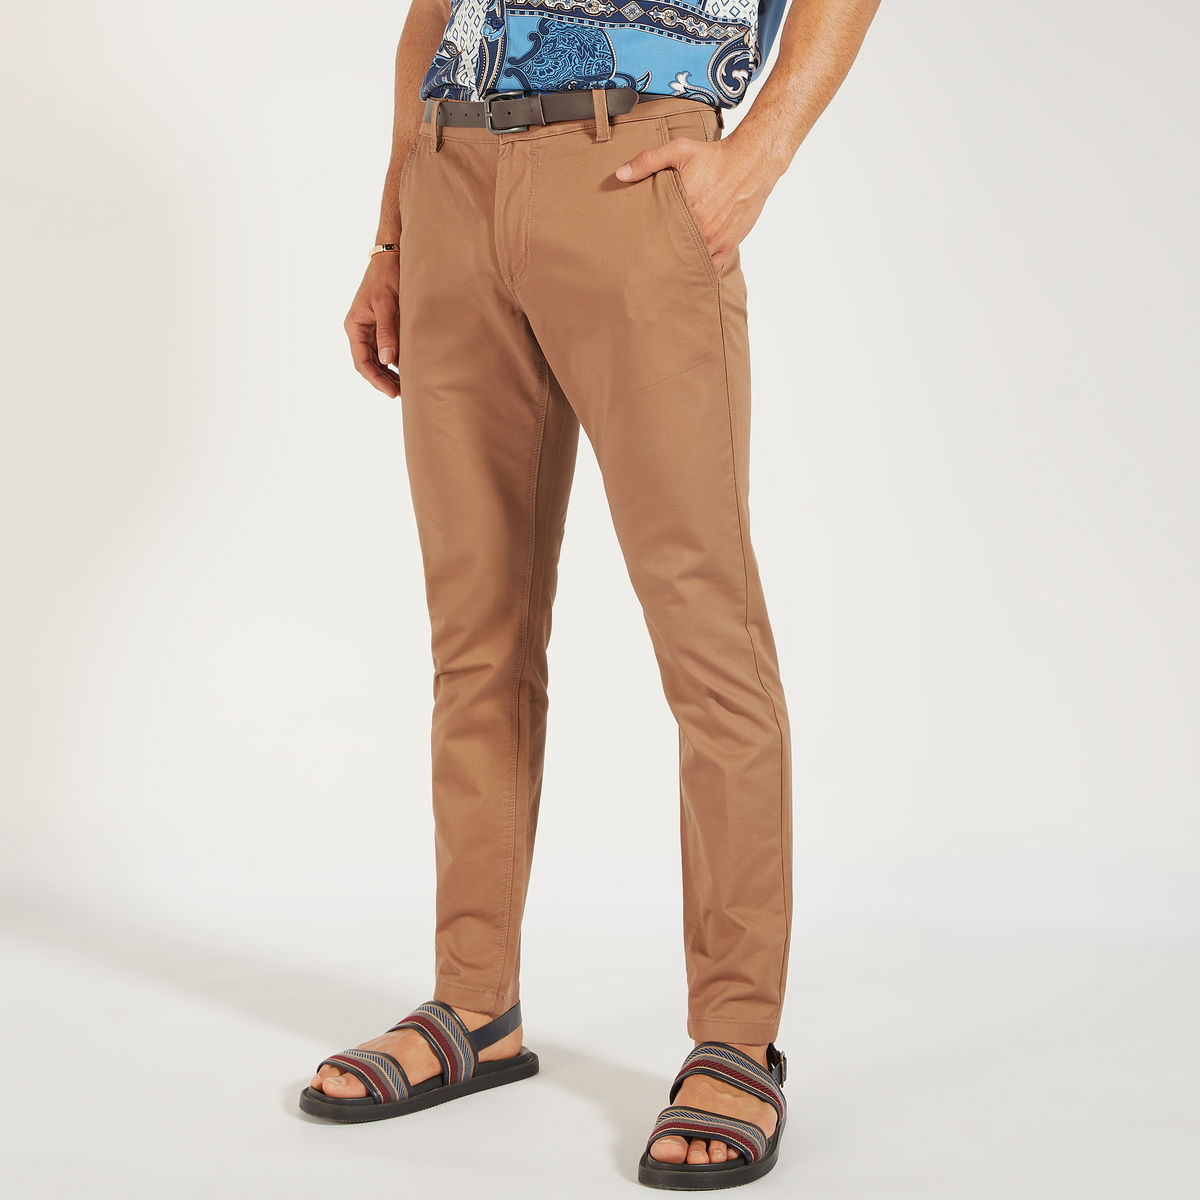 Buy Solid Slim Fit Chinos with Belt and Pockets | Splash UAE